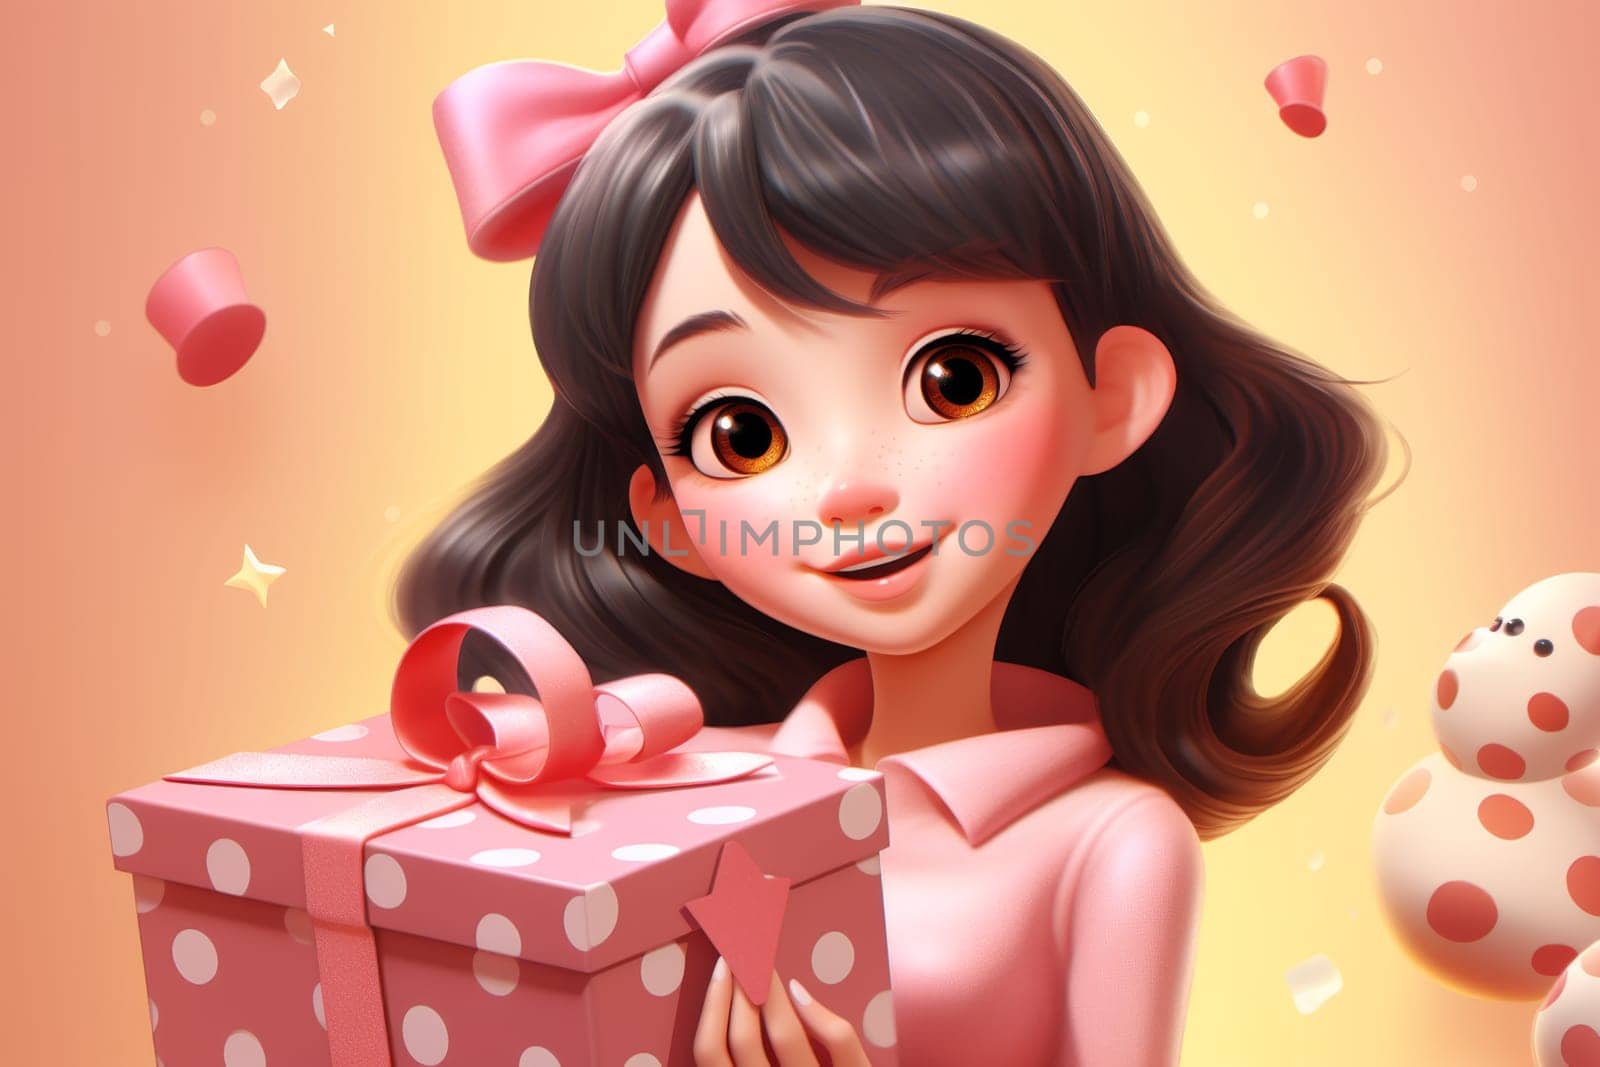 Portrait of a beautiful girl holding a gift box. 3d illustration.